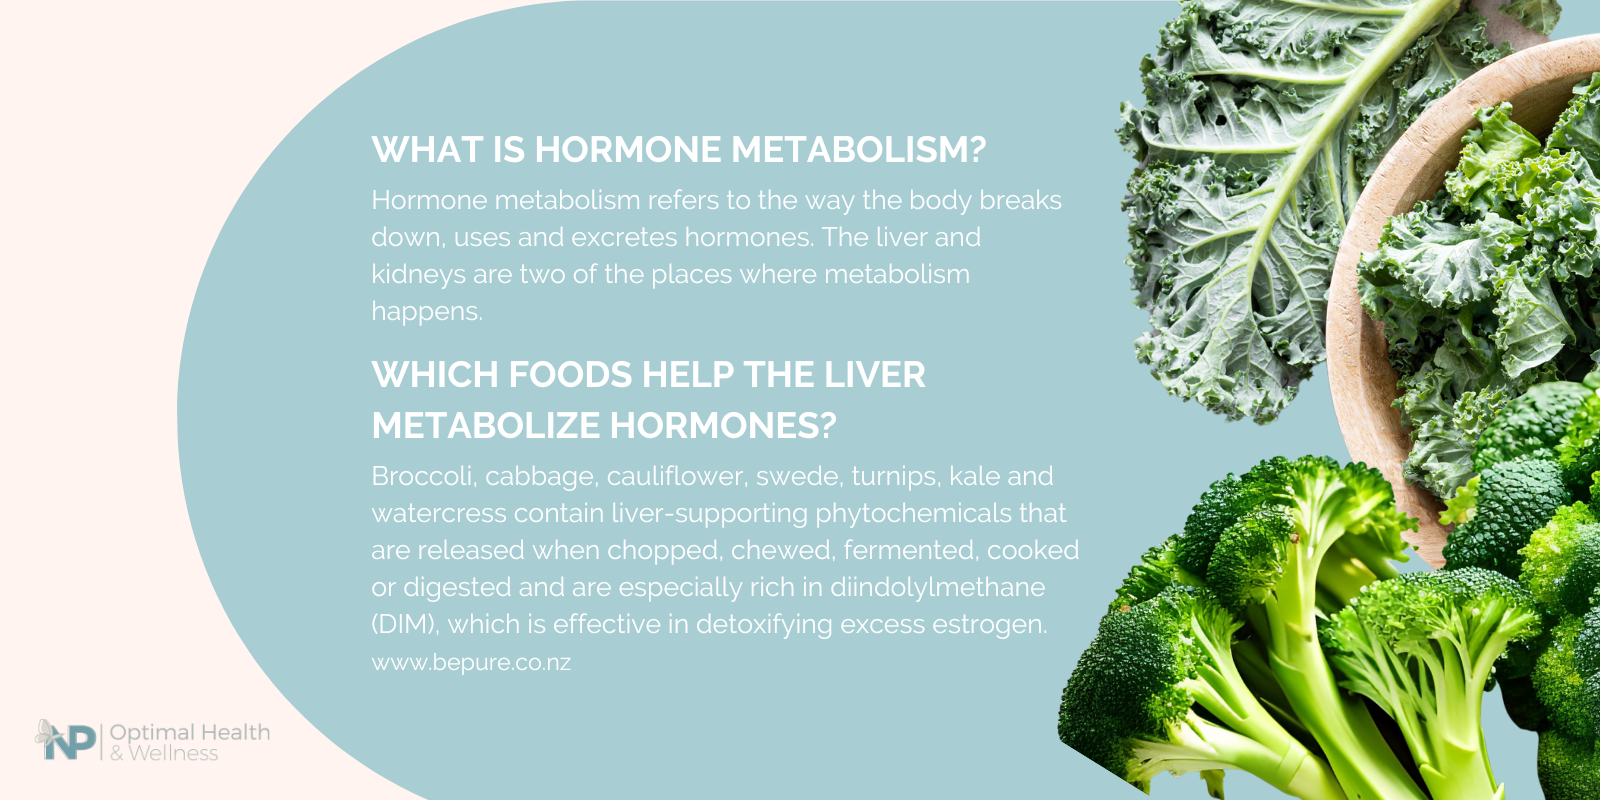 Information about hormone metabolism